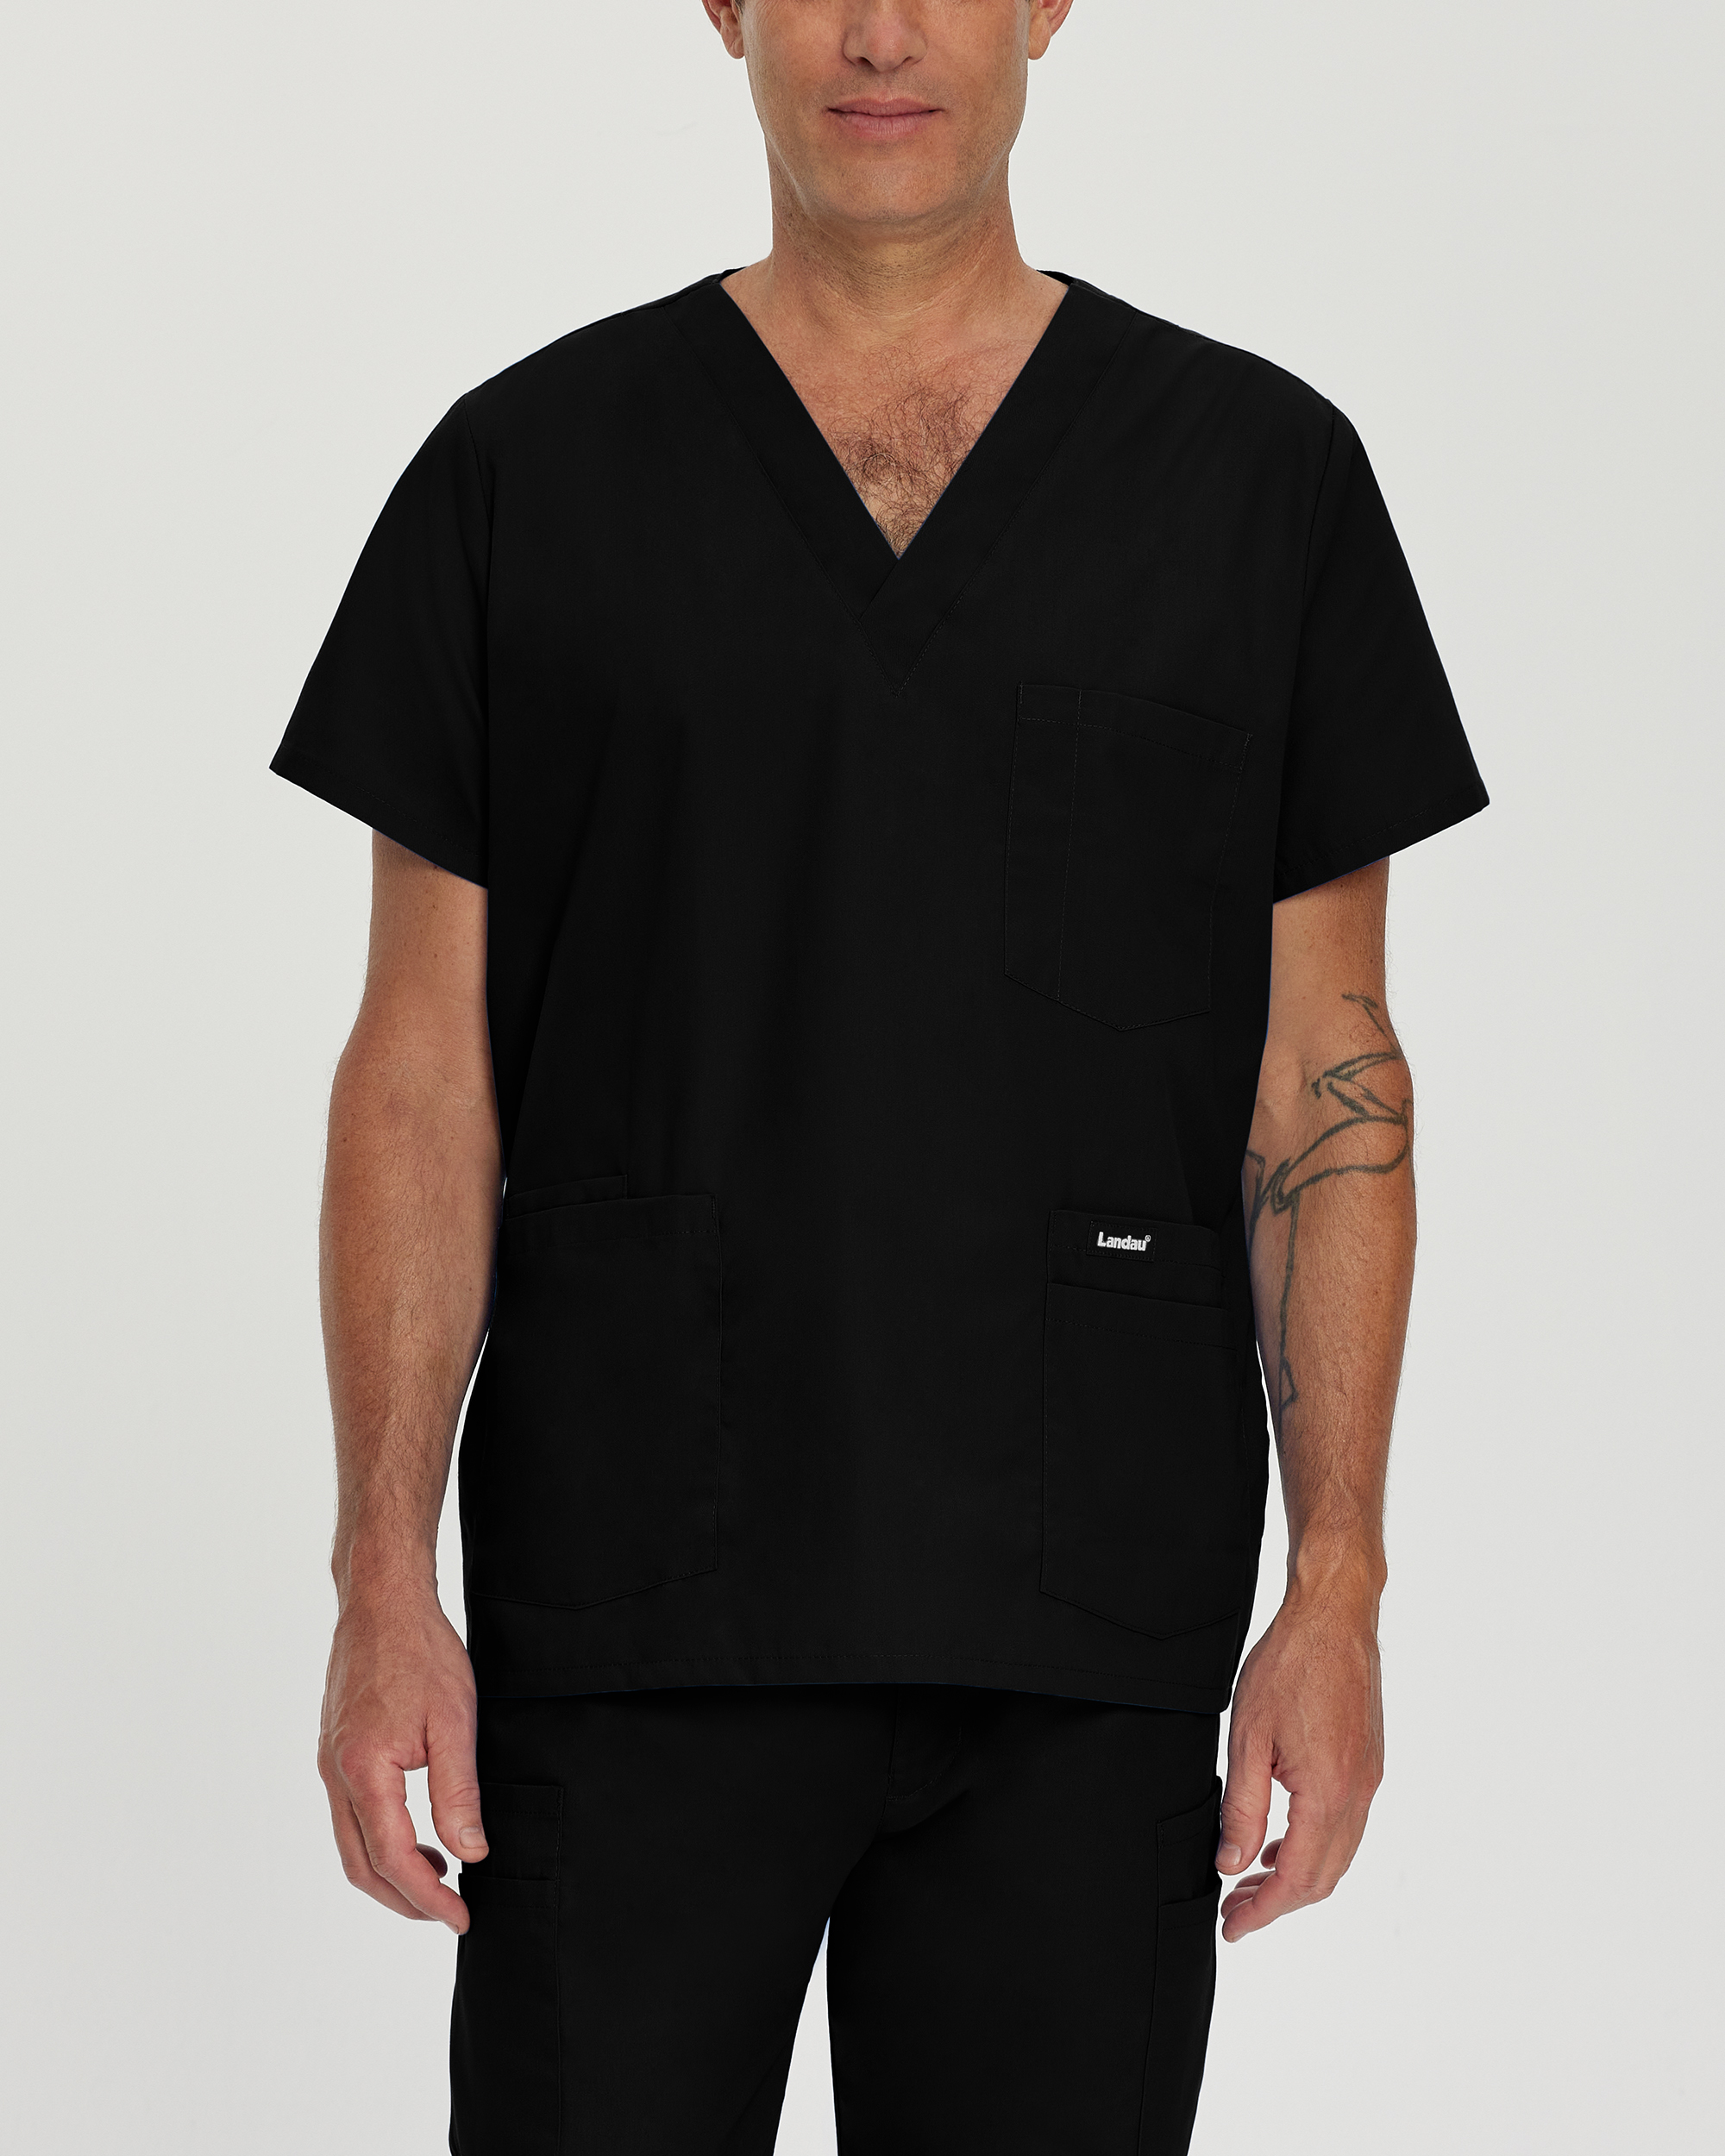 Landau Essentials Scrub Top for Men: 5 Pocket, Classic Relaxed Fit, V-Neck, Durable Medical Scrubs 7489 Questions & Answers